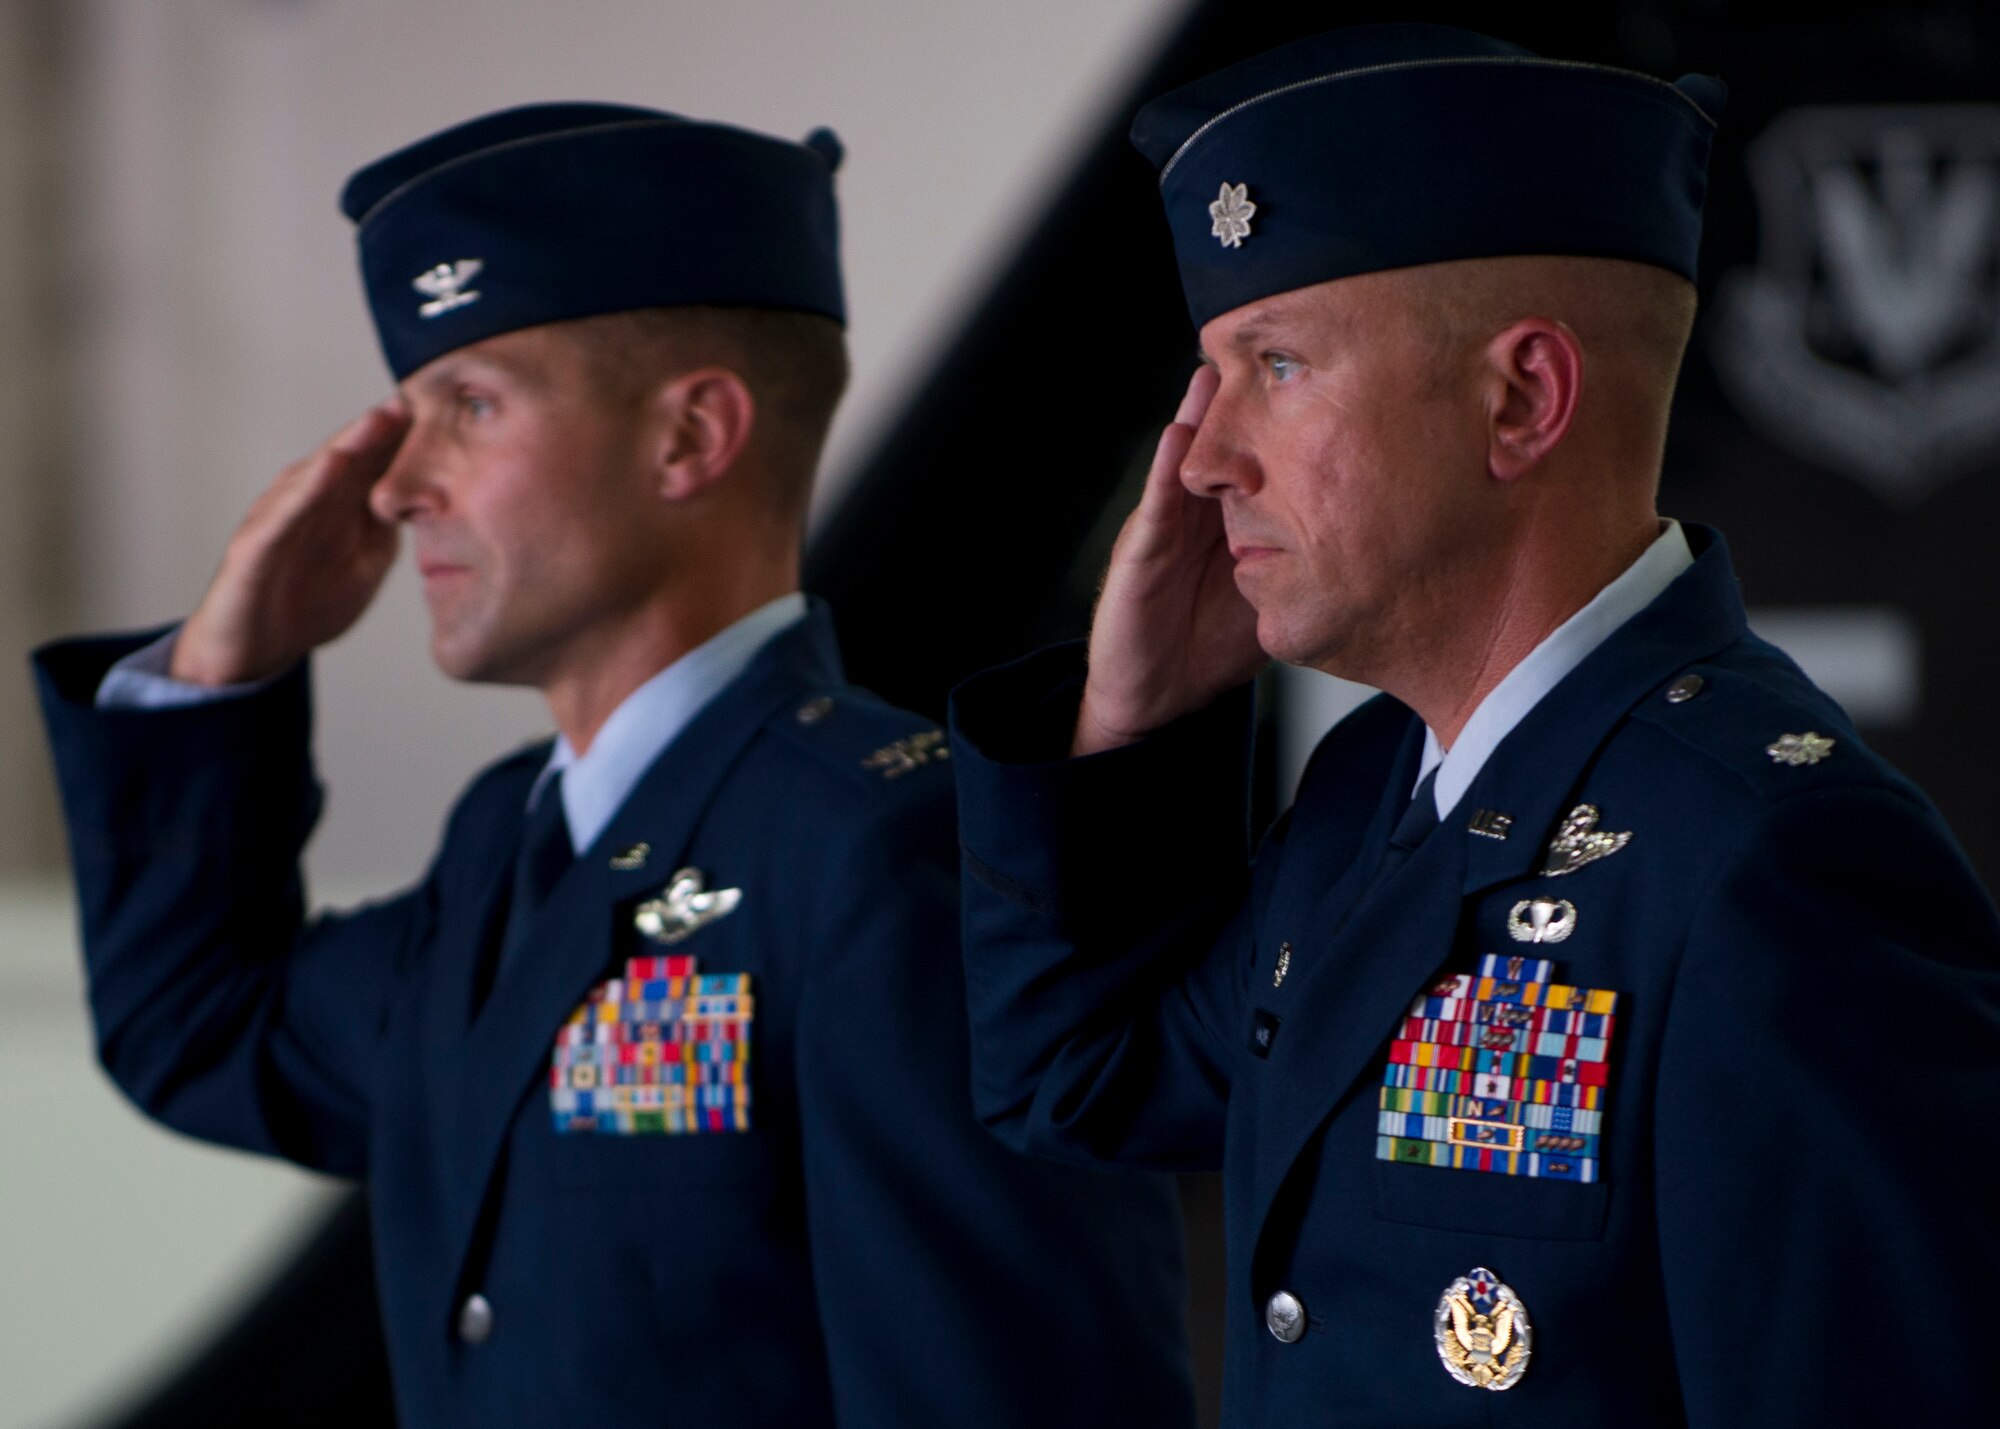 U.S. Air Force Col. Larry Broadwell, 1st Operations Group commander, and Lt. Col. Brian Coyne salute during the 71st Fighter Squadron reactivation ceremony at Langley Air Force Base, Va., Aug. 21, 2015. The 71st FS was deactivated in September 2010 as the 1st Fighter Wing moved from the F-15C Eagle to the fifth generation F-22 Raptor. (U.S. Air Force photo by Staff Sgt. John D. Strong II/Released)